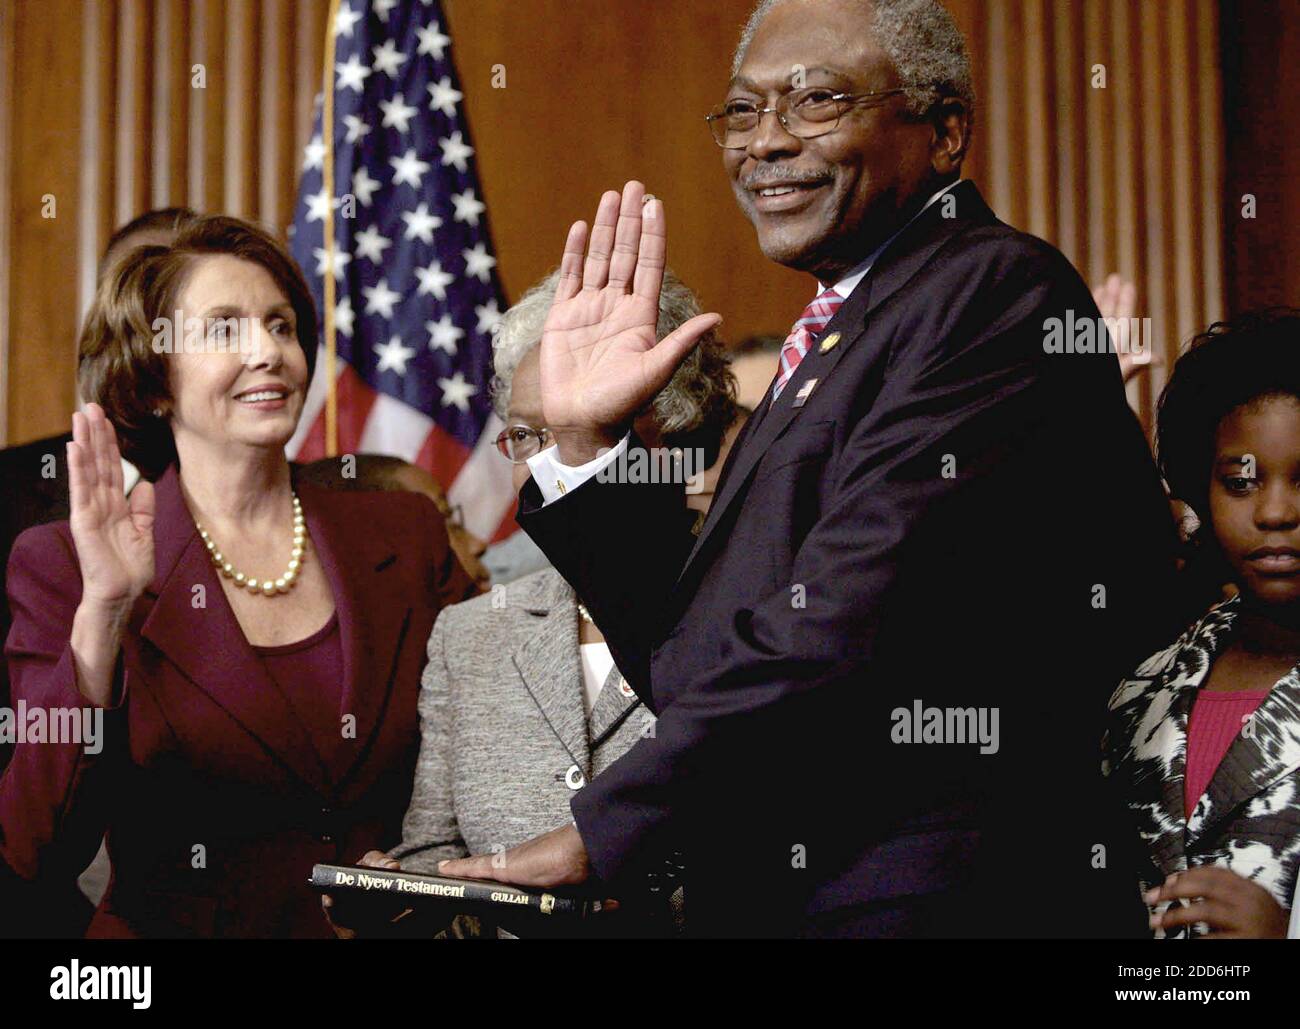 NO FILM, NO VIDEO, NO TV, NO DOCUMENTARY - U.S. Congressman Jim Clyburn (D-SC) participates in a mock swearing in ceremony with Speaker of the House, Nancy Pelosi, on Capitol Hill, in Washington, D.C., US, on January 4, 2007. Photo by Andrew Councill/MCT/ABACAPRESS.COM Stock Photo